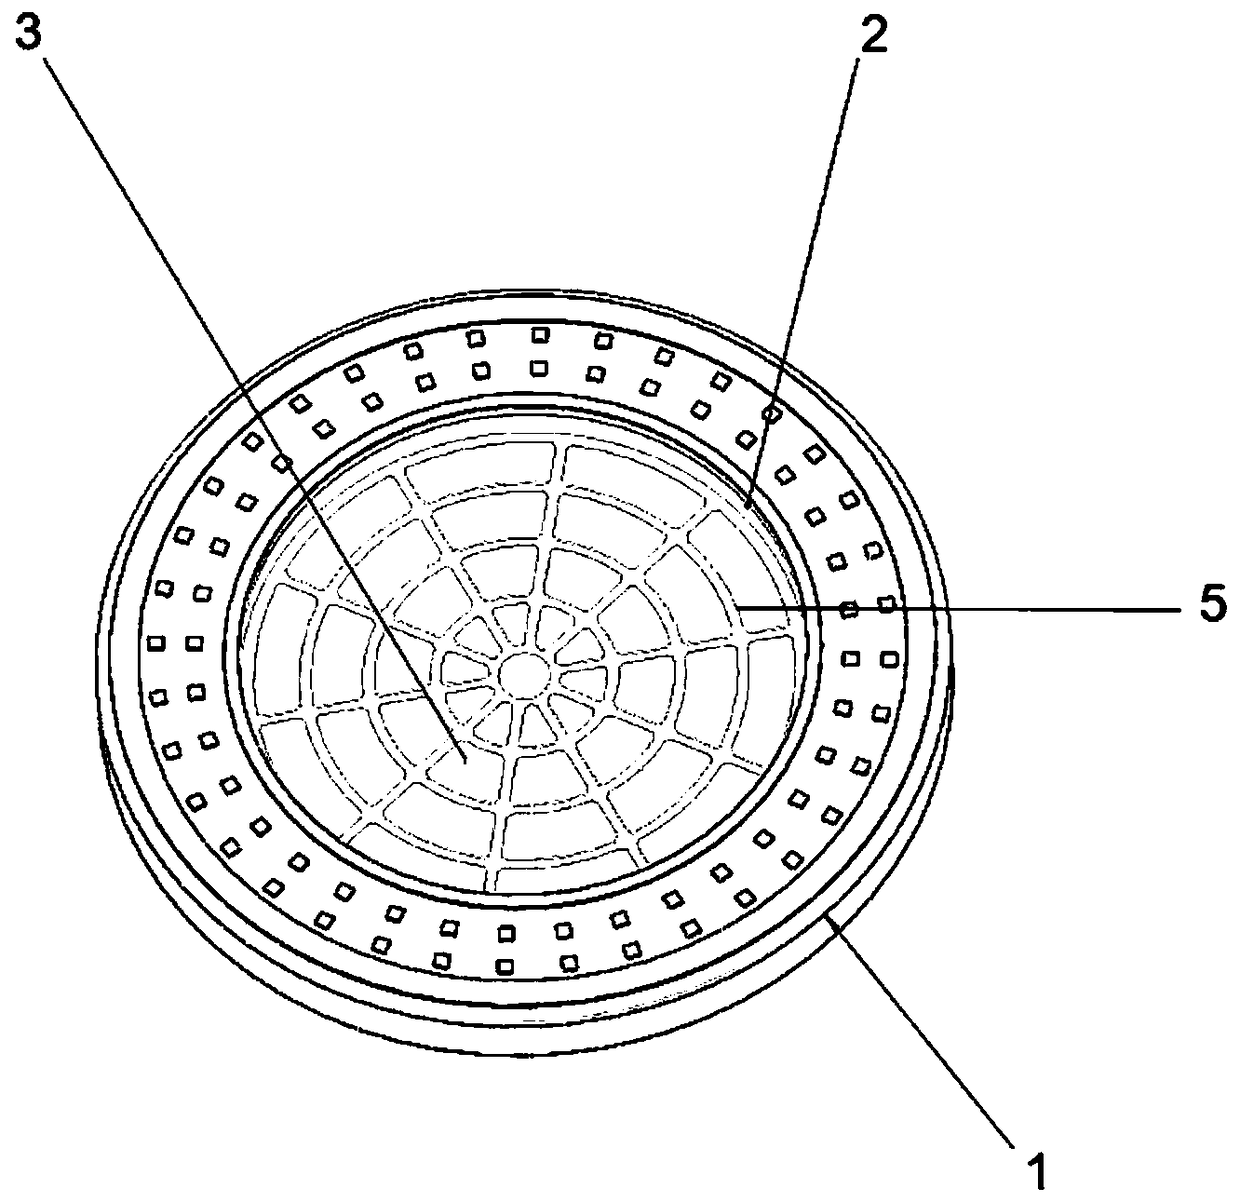 Manhole cover suitable for intelligent inspection well